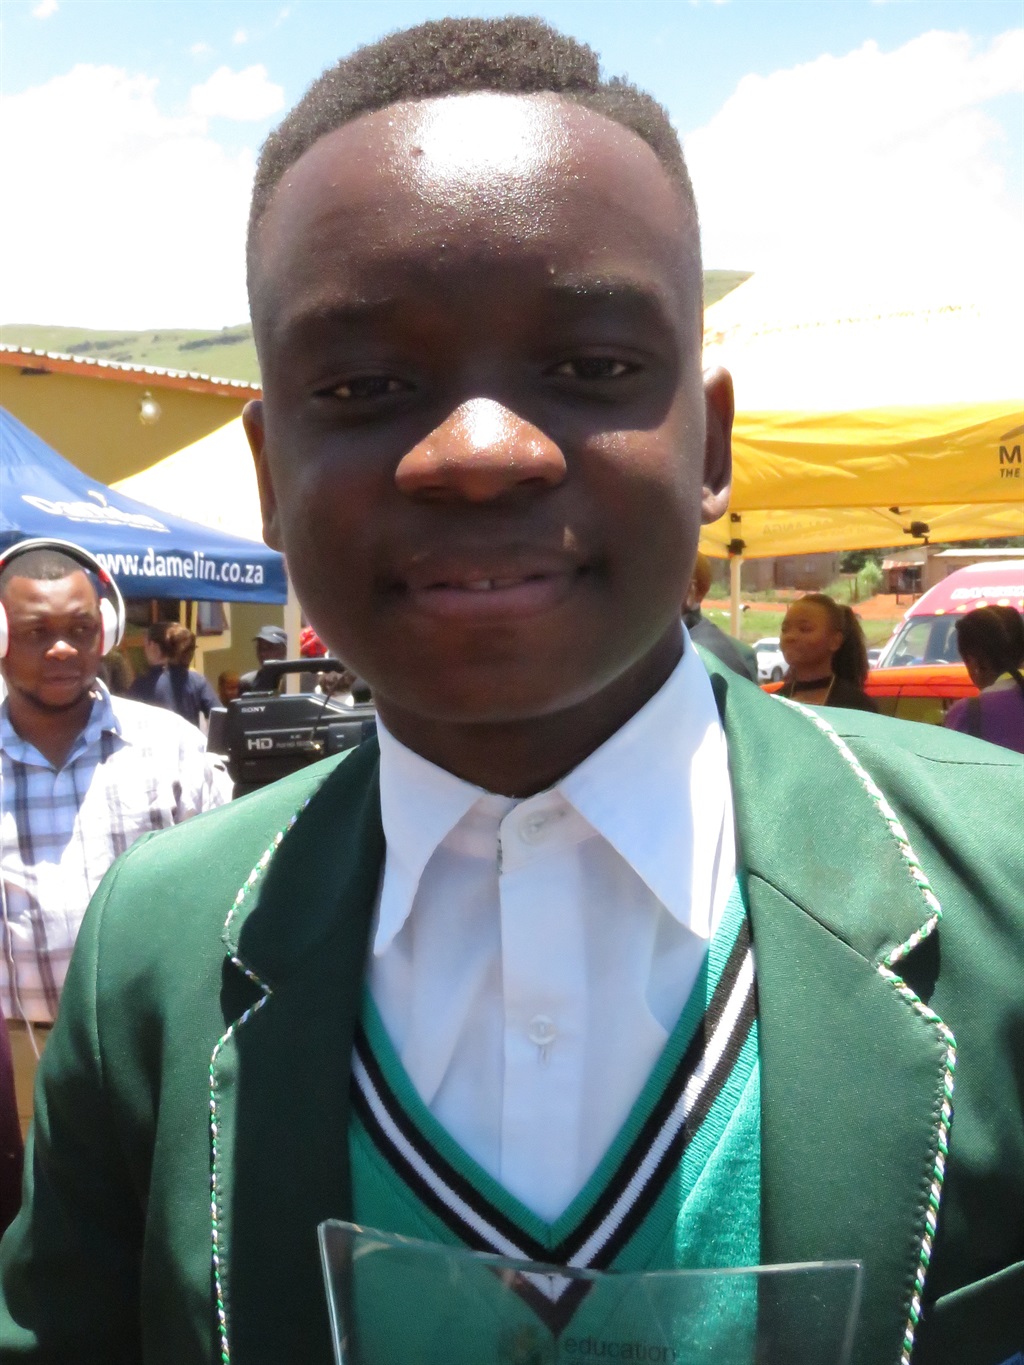 Thalenta Ngobeni (16) from Acorn Oaks High School obtained seven distinctions with 100 % pass in mathematics, physical science and accounting is the top Mpumalanga Grade 12 learner.Picture: Sizwe sama Yende